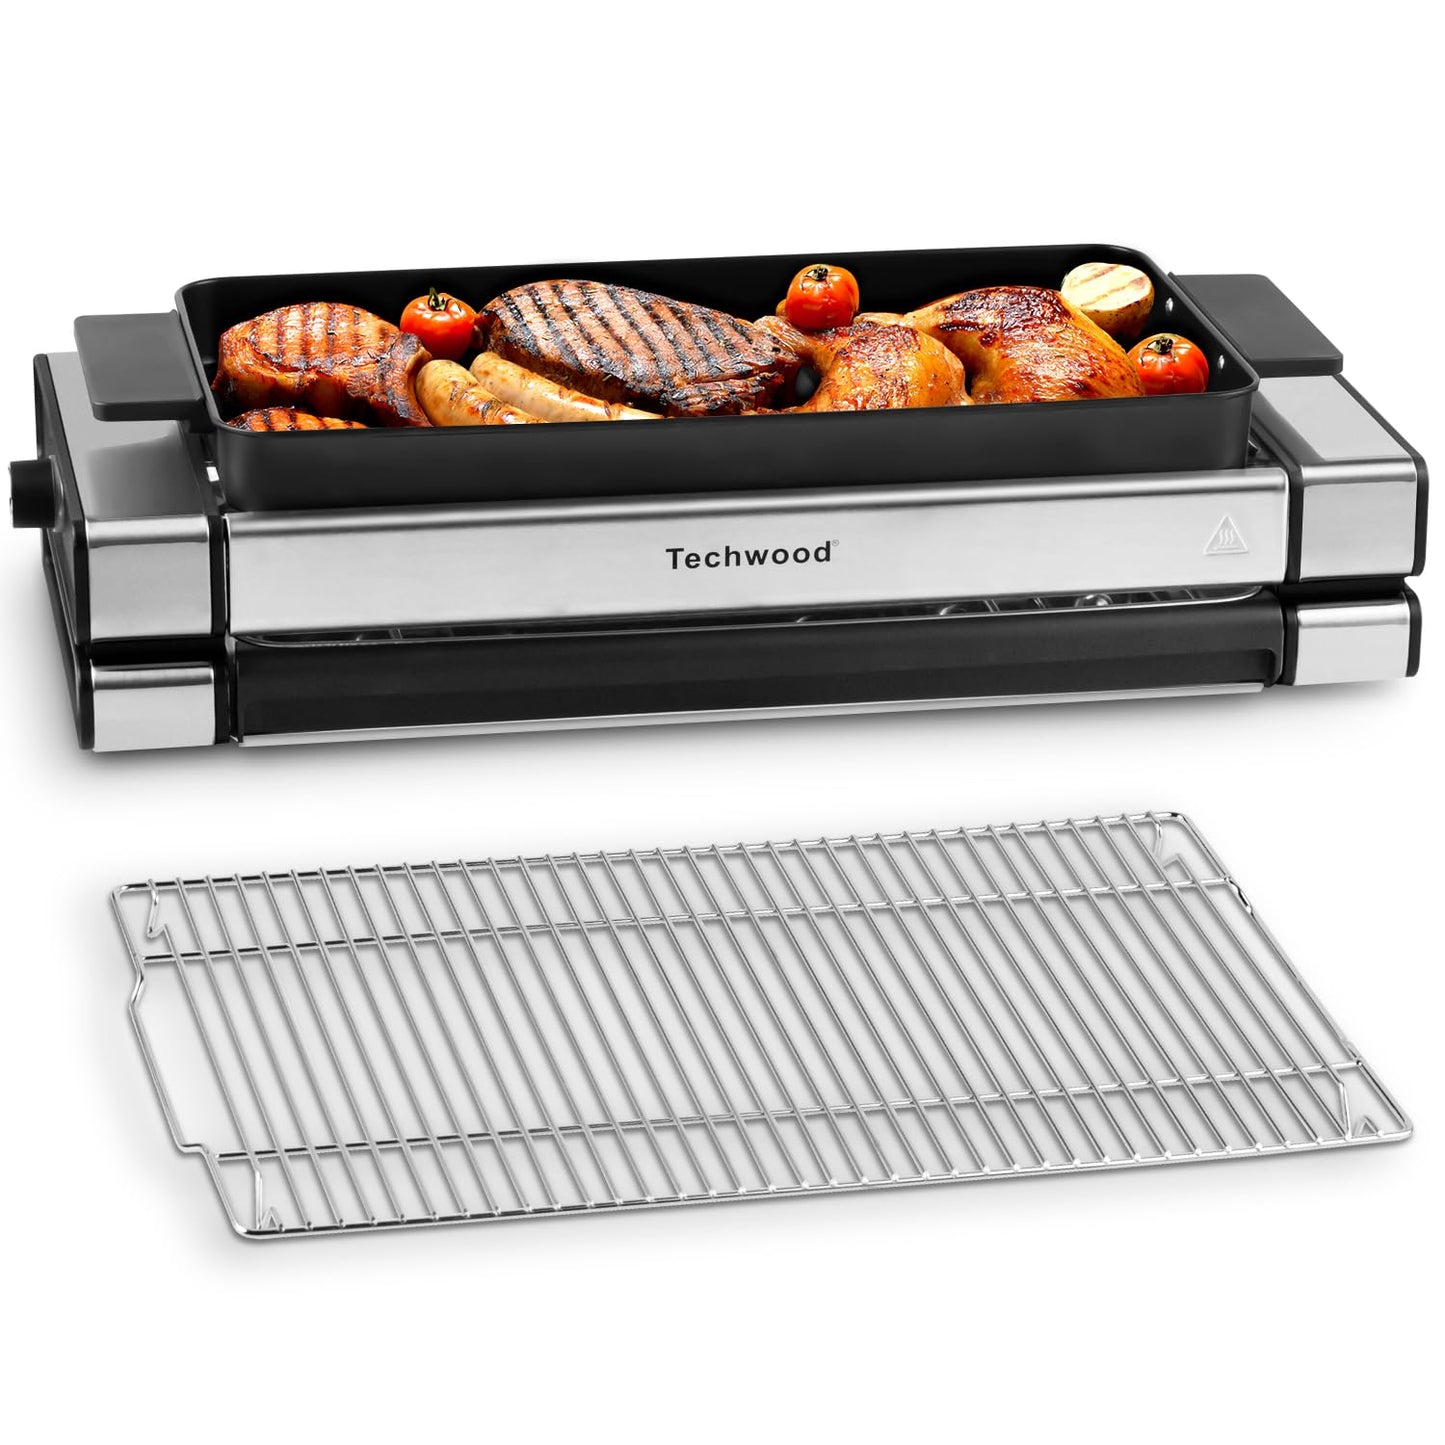 Techwood 1500W BBQ Grill with 5 Gear Temperature Adjustment & Metal Drip Tray, Handle, Removable Griddle and Grill Barbecue Plate for Party Cooking, Stainless Steel, Silver